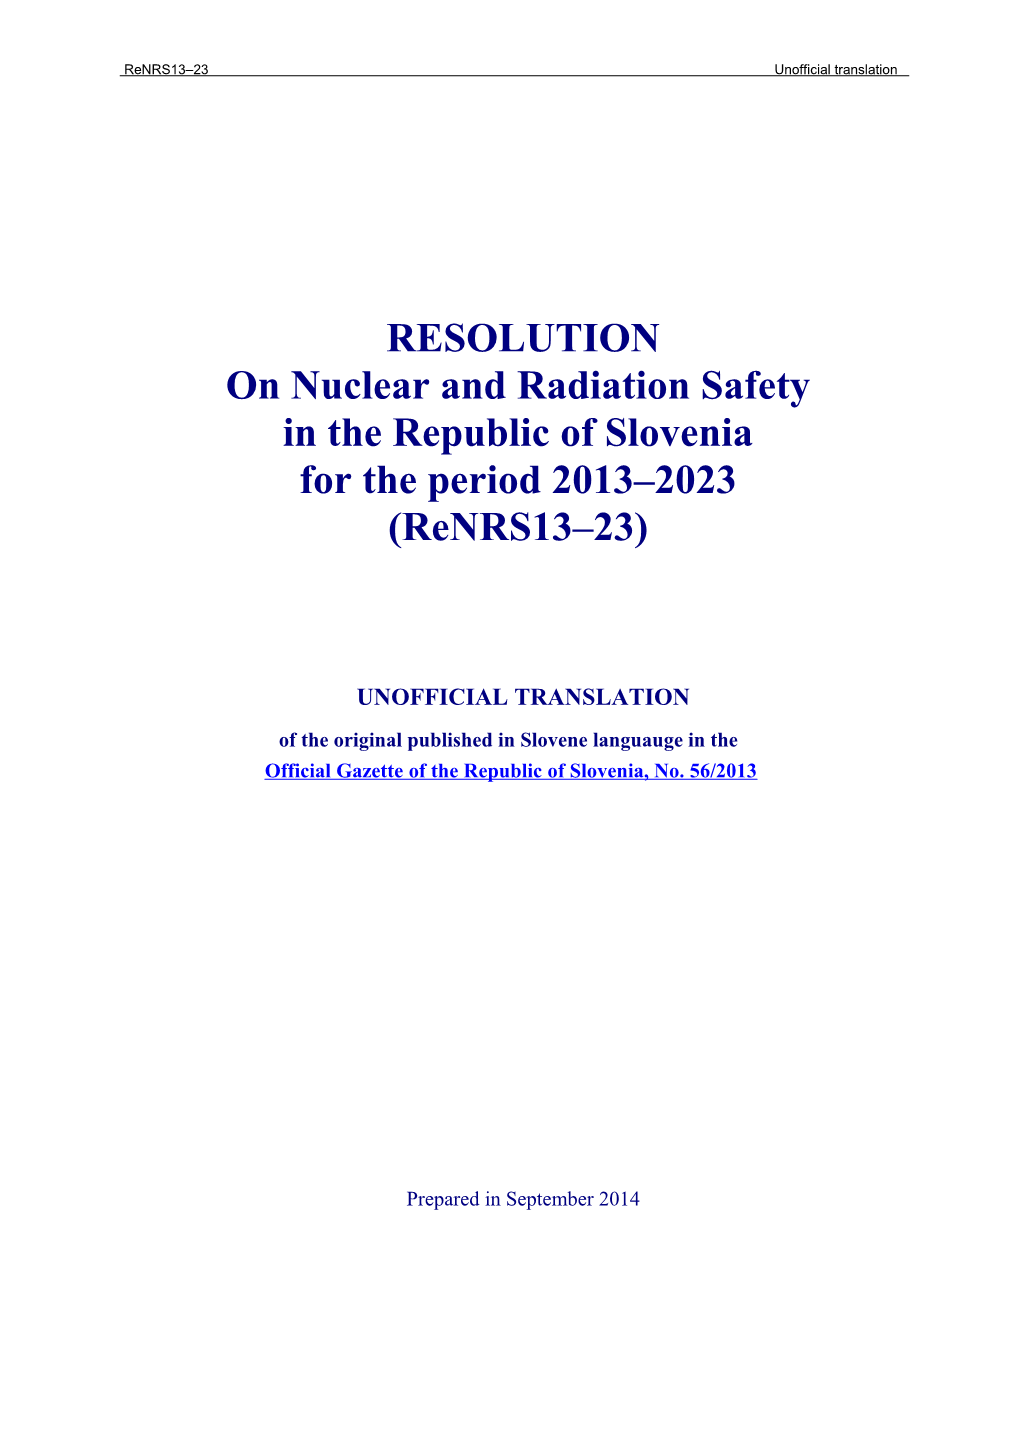 On Nuclear and Radiation Safety